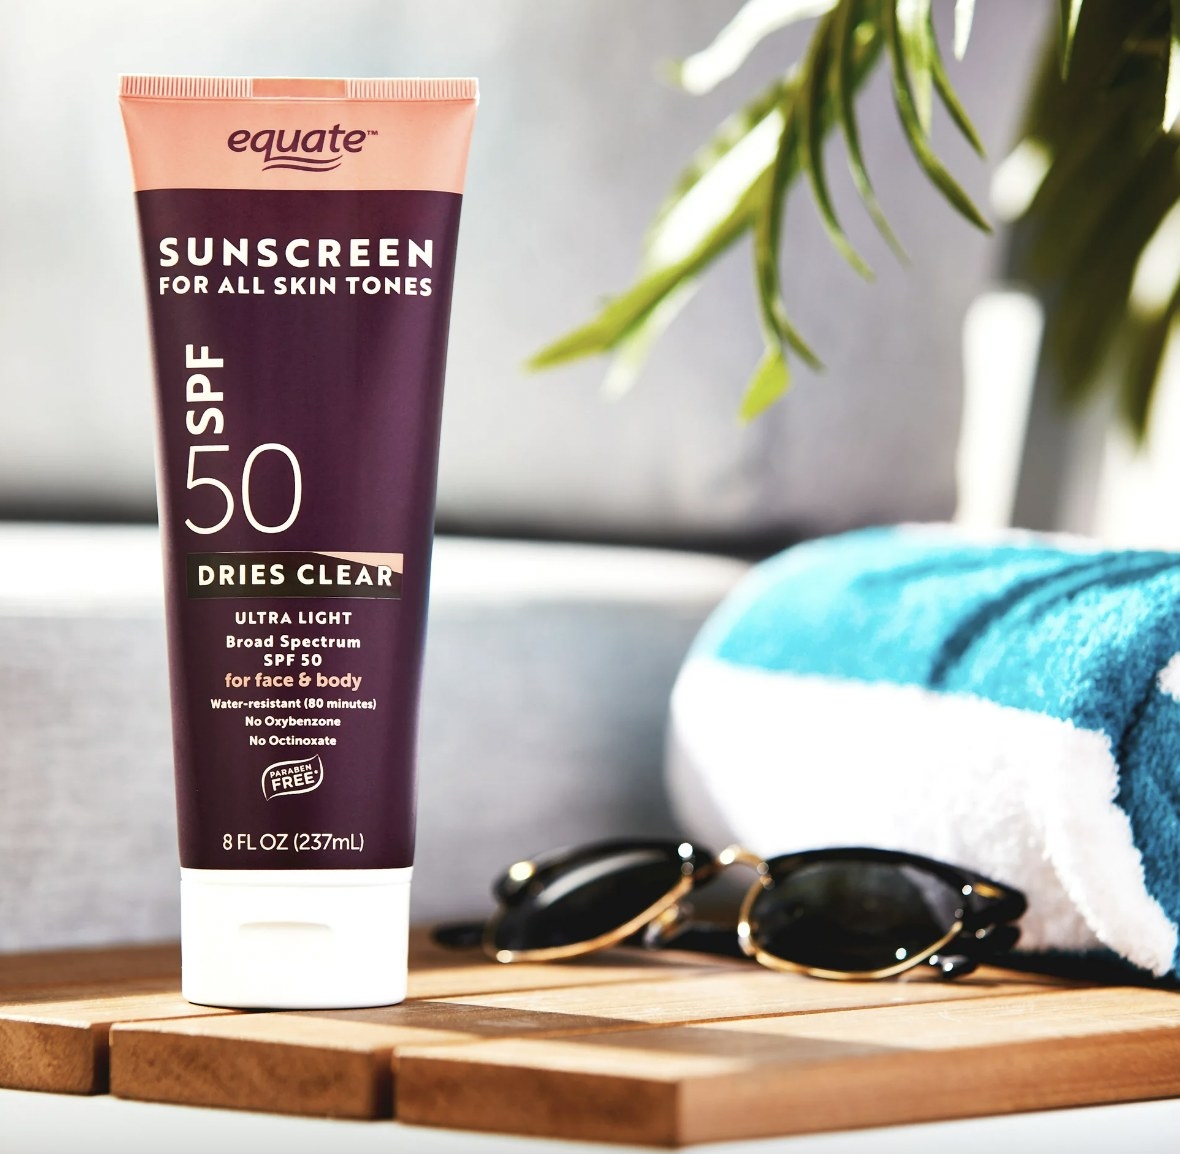 A rube of sunscreen lotion, sunglasses and a beach towel